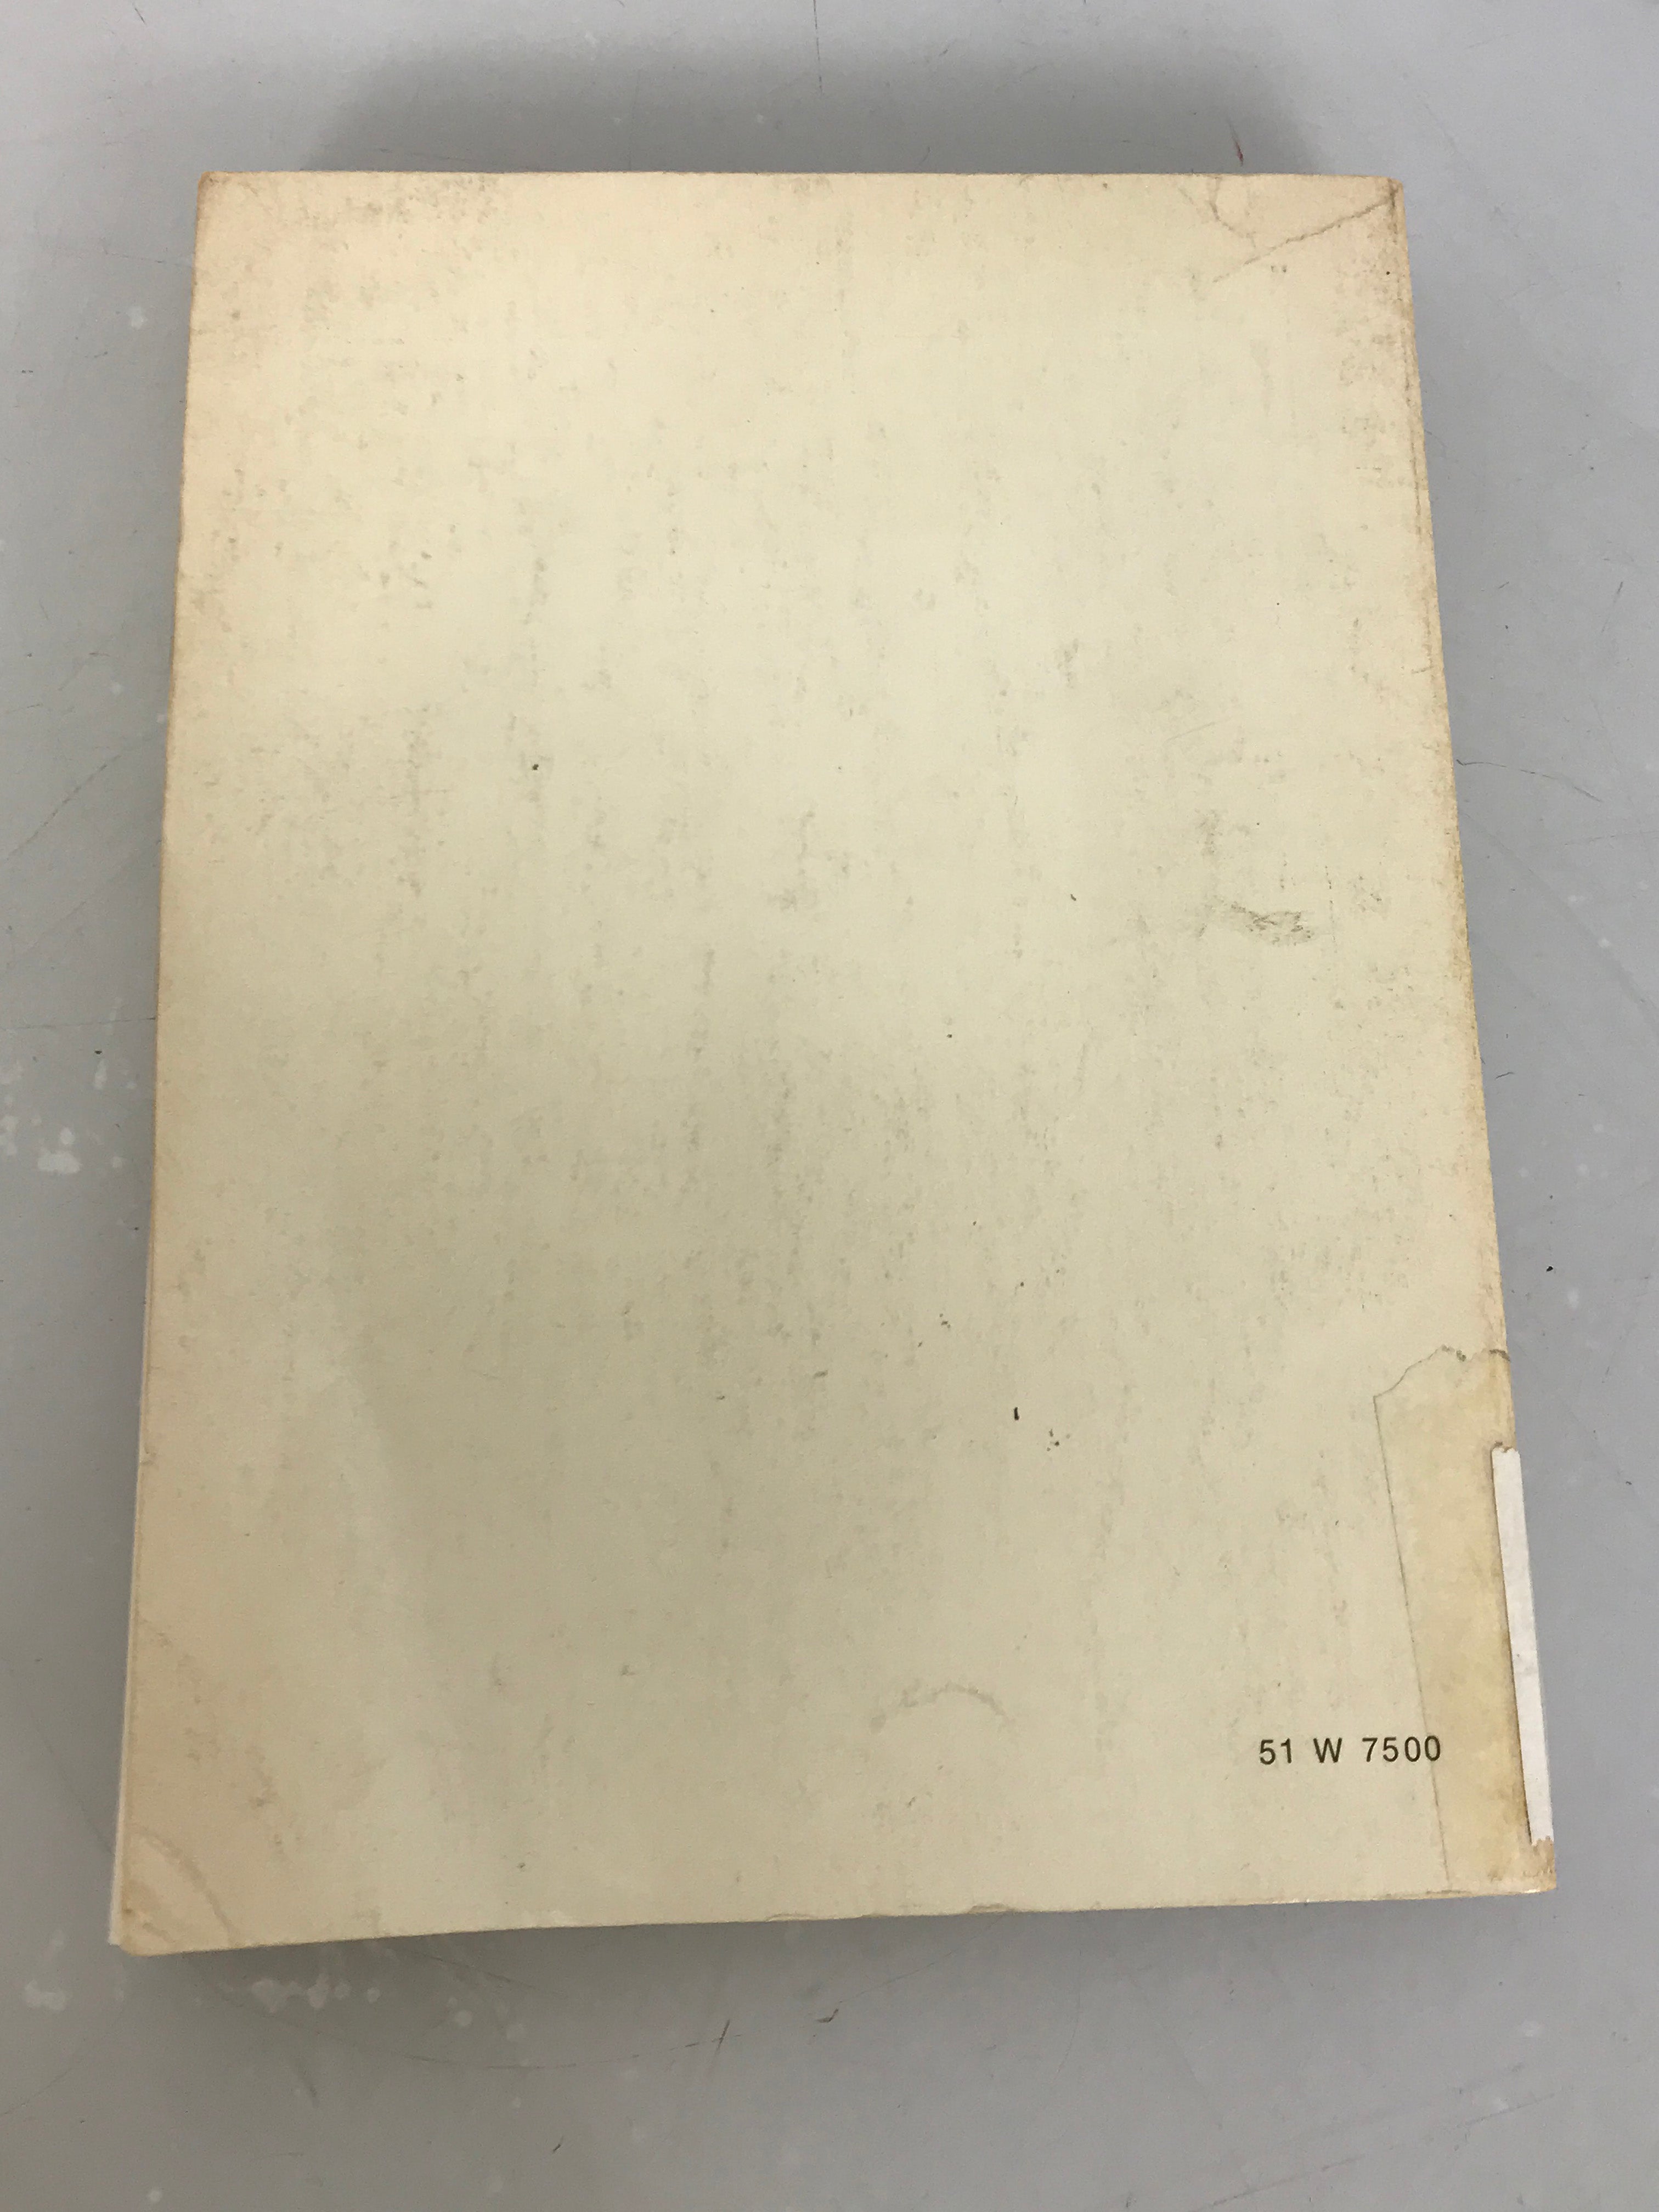 Readings in Physiological Psychology Jack Roy Strange and Ray Foster 1966 SC